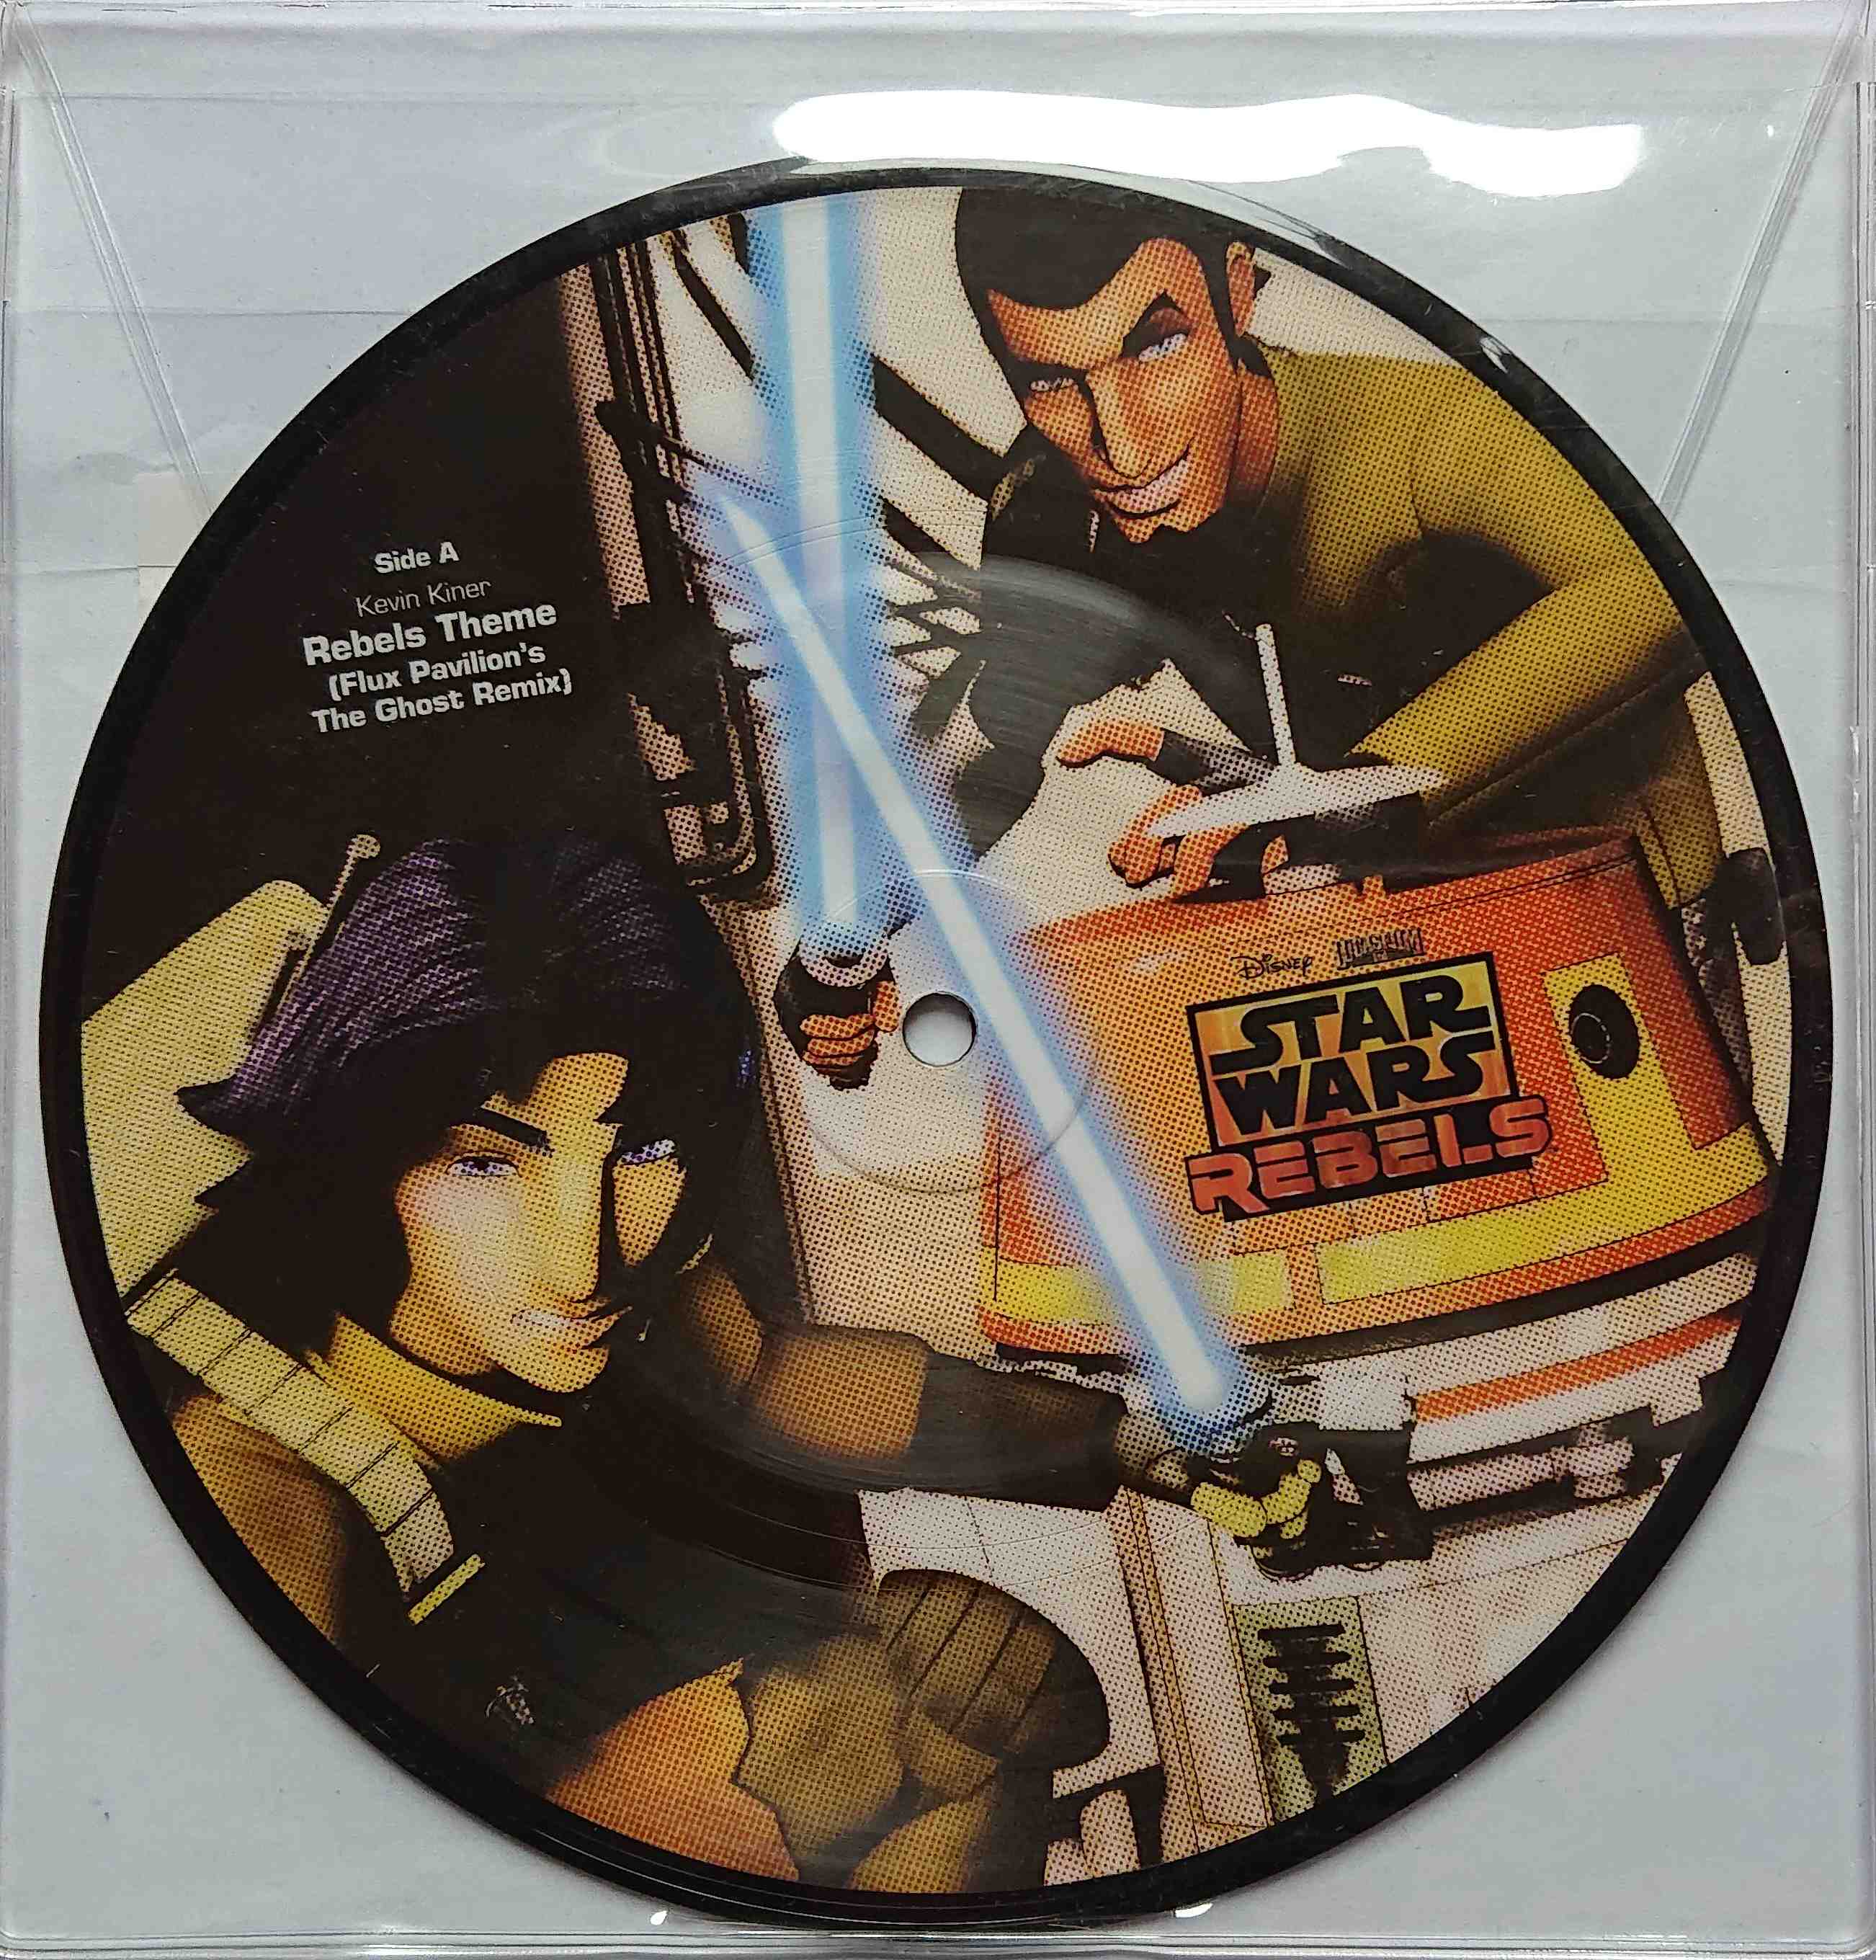 Picture of D002161021 Star Wars Rebels by artist Kevin Kiner from ITV, Channel 4 and Channel 5 library